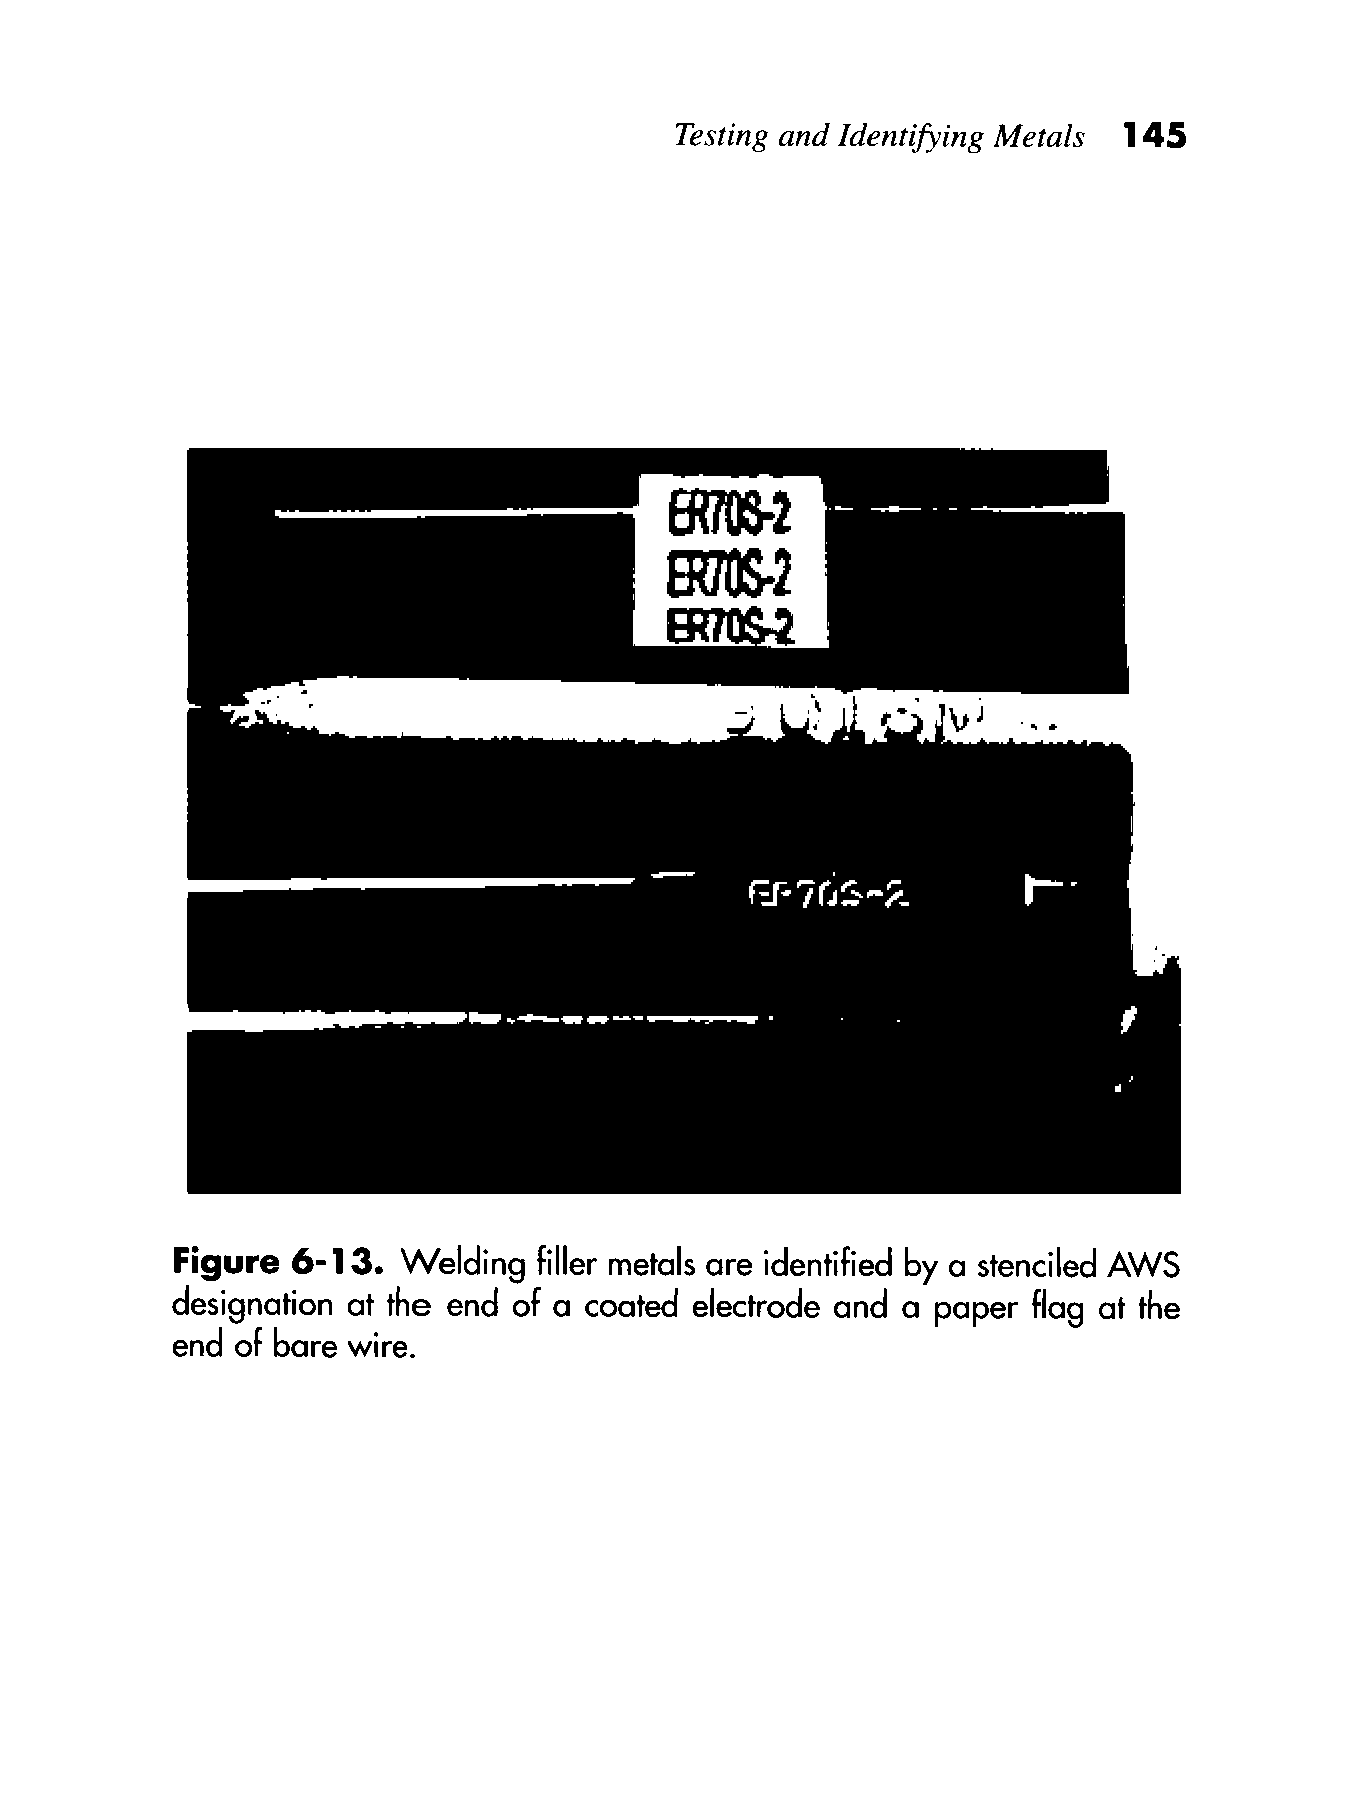 Figure 6-13. Welding filler metals are identified by a stenciled AWS designation at the end of a coated electrode and a paper flag at the end of bare wire.